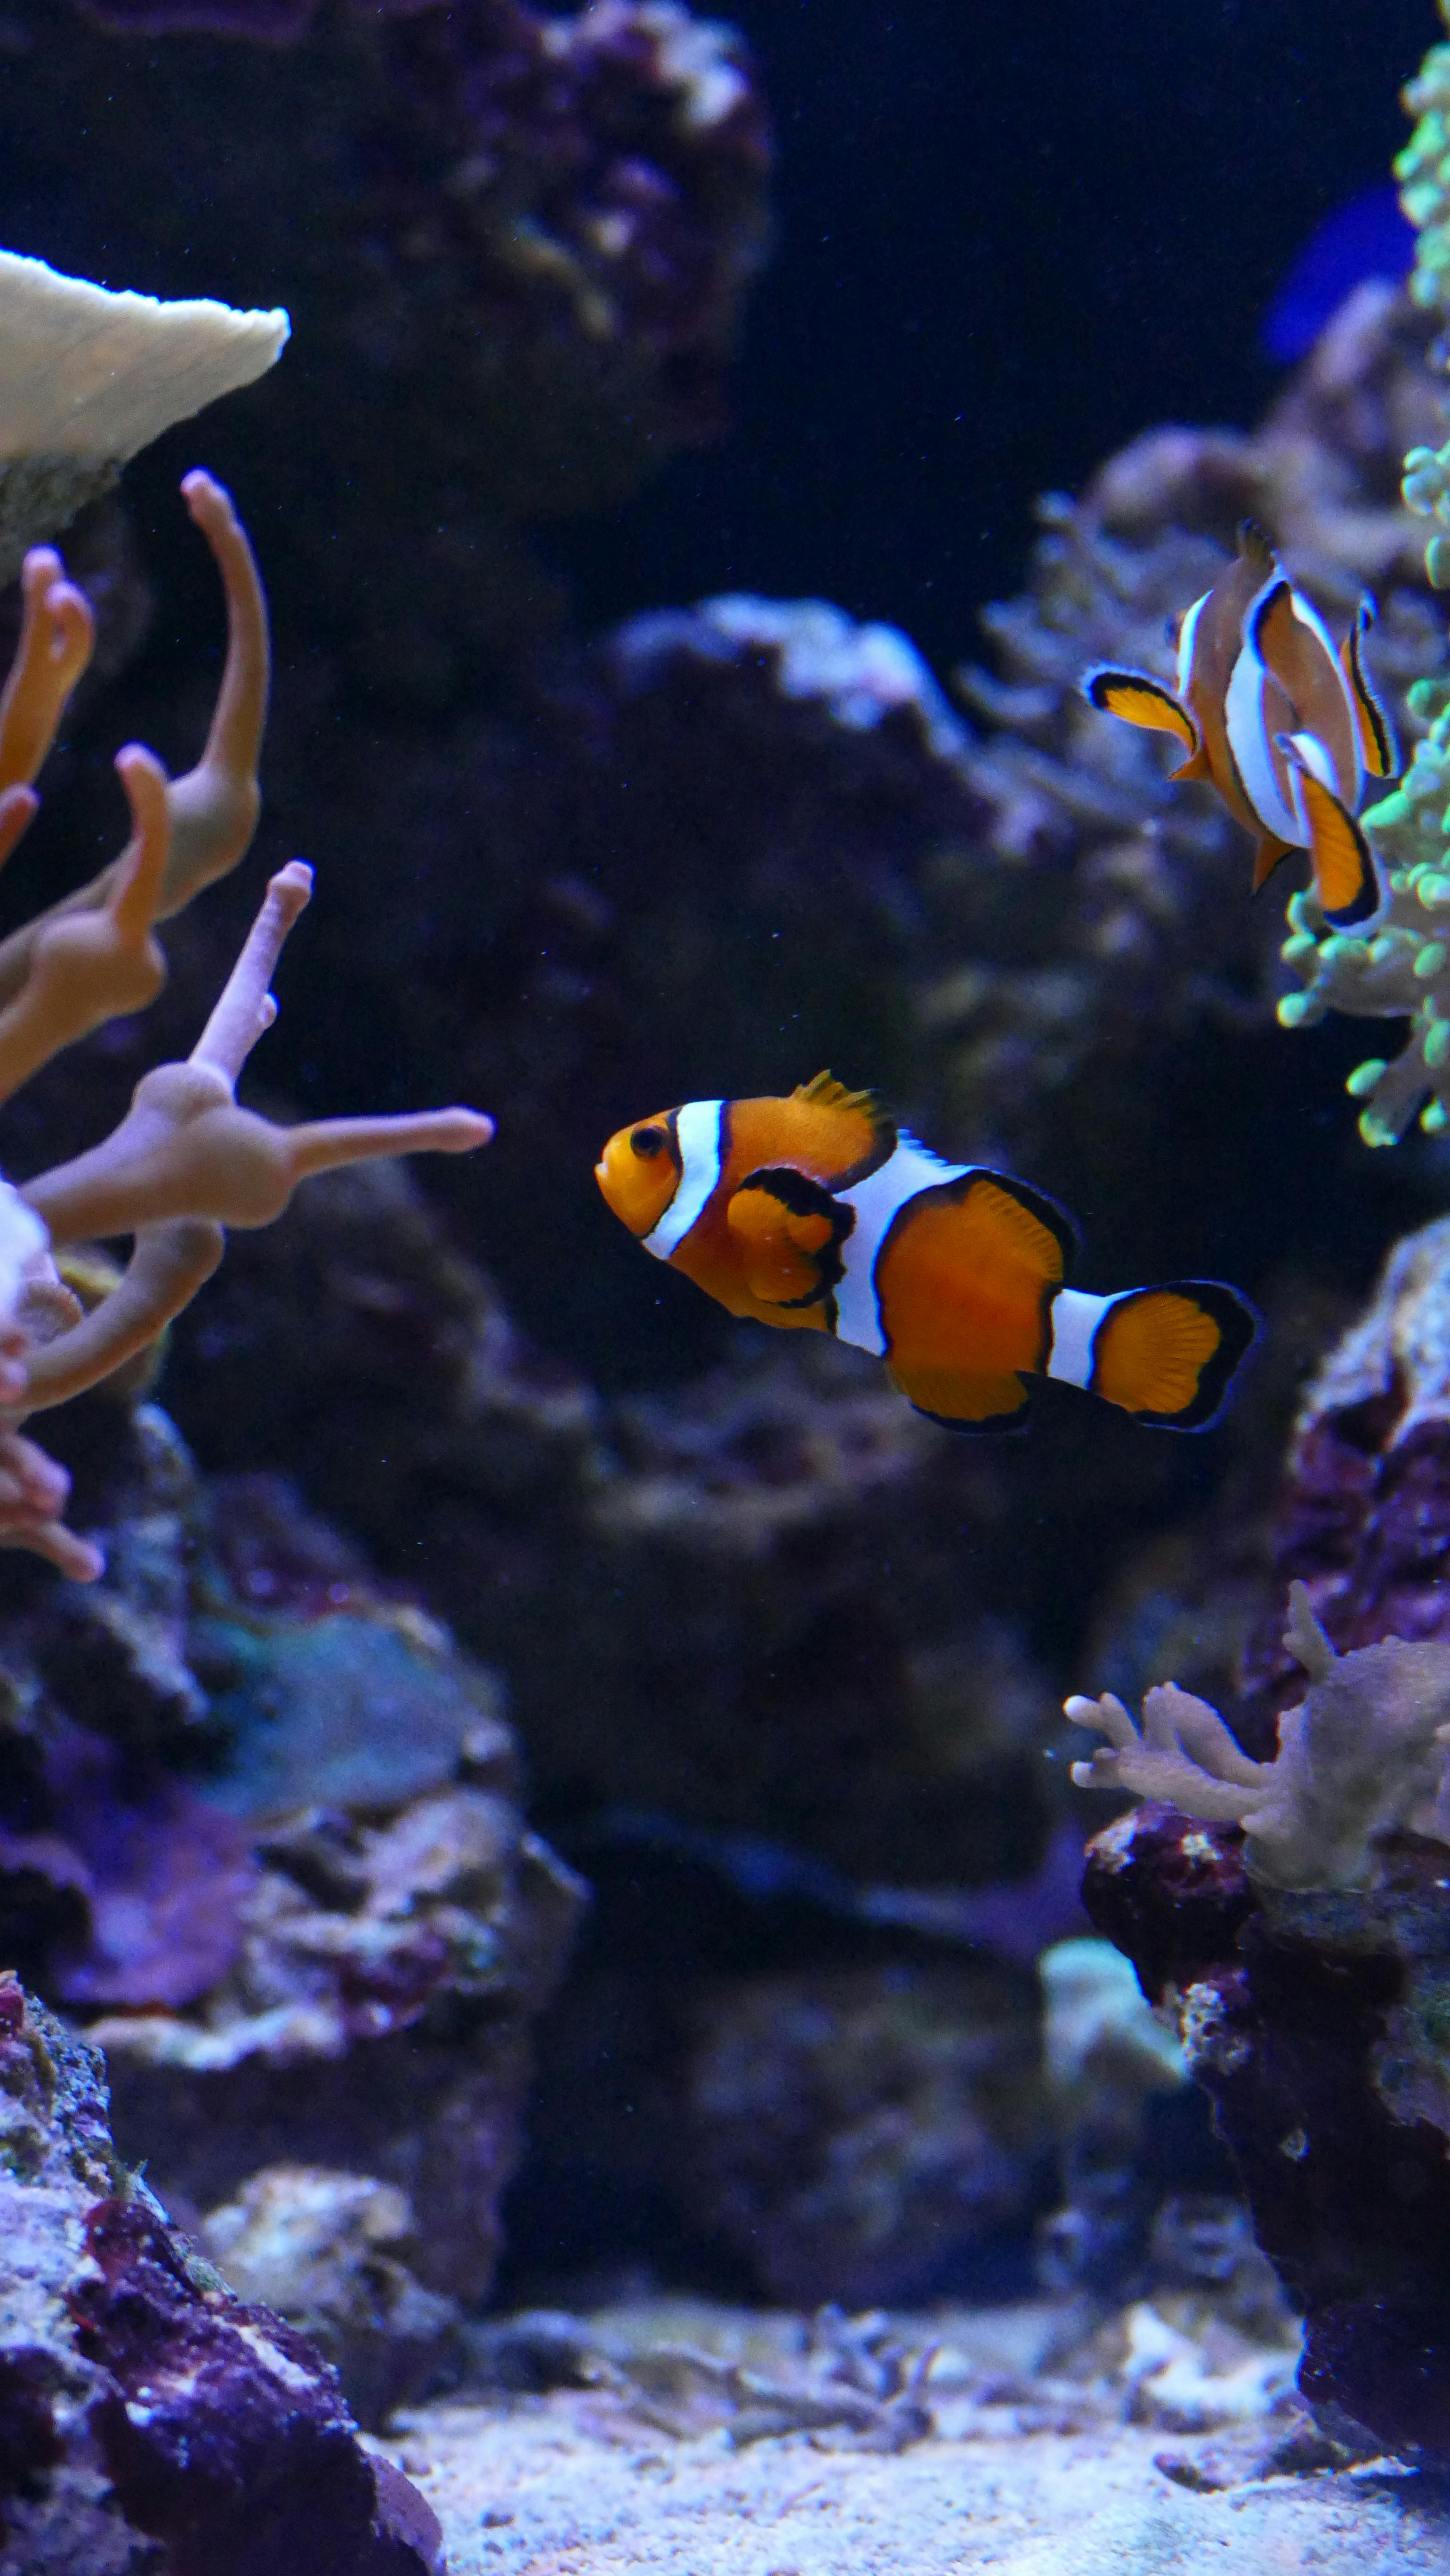 Best 500 Clown Fish Pictures  Download Free Images on Unsplash